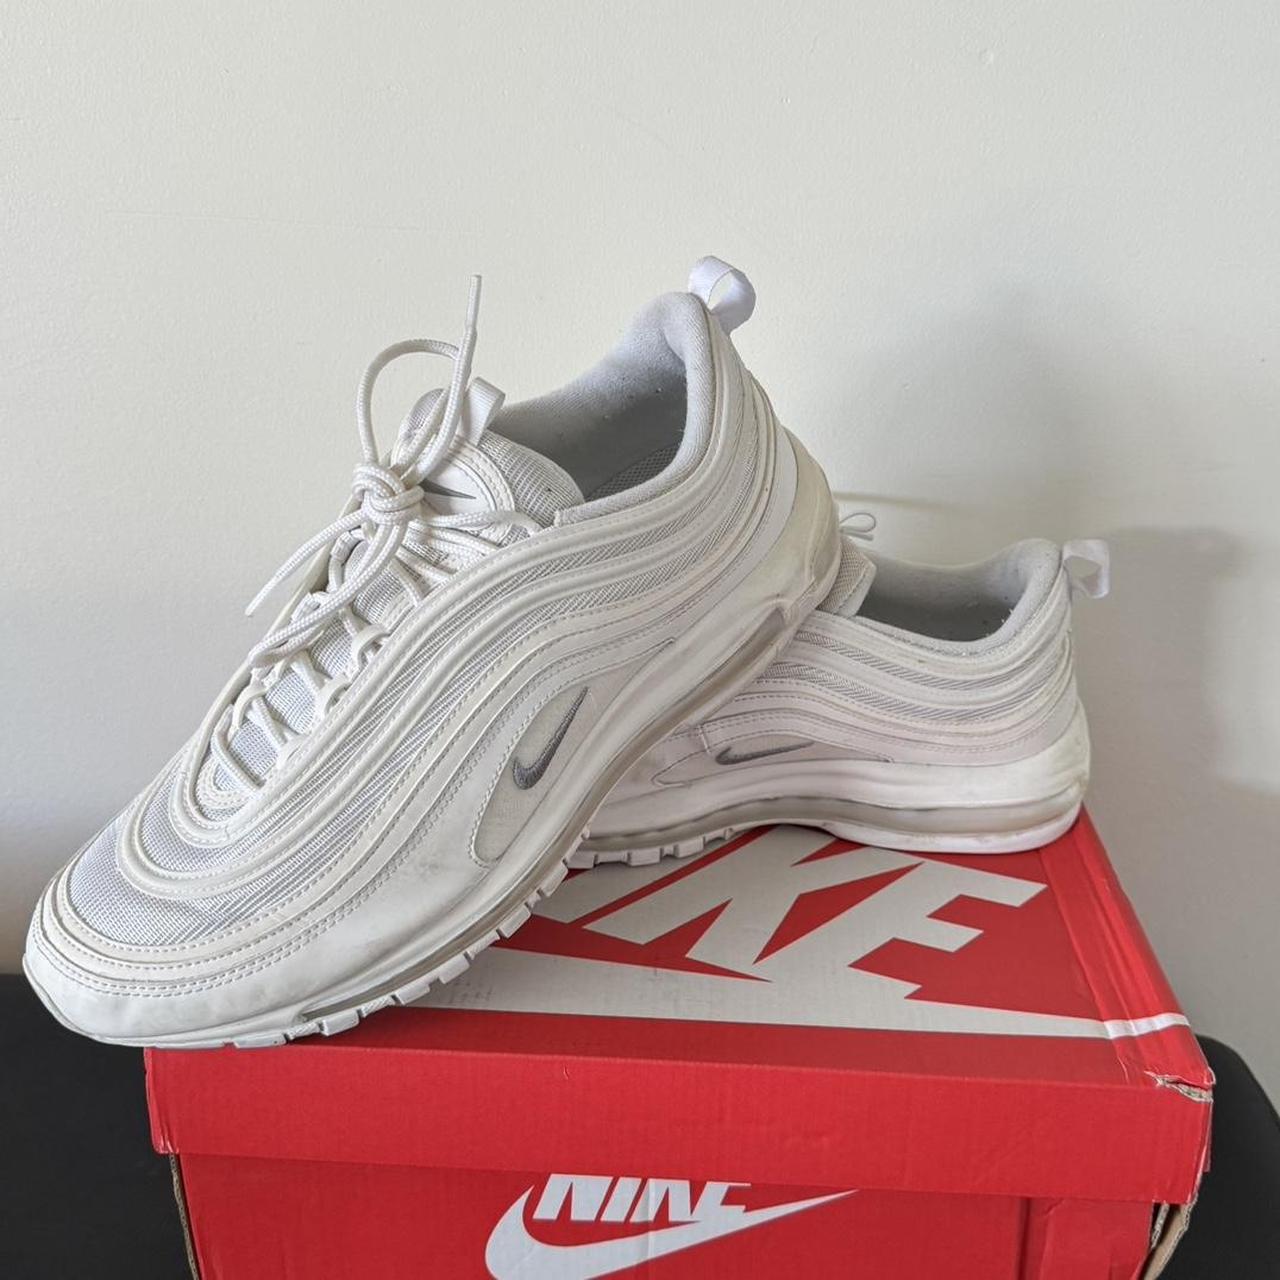 Nike 97’s ️ Size US 13 ️ 8/10 Condition #nike - Depop